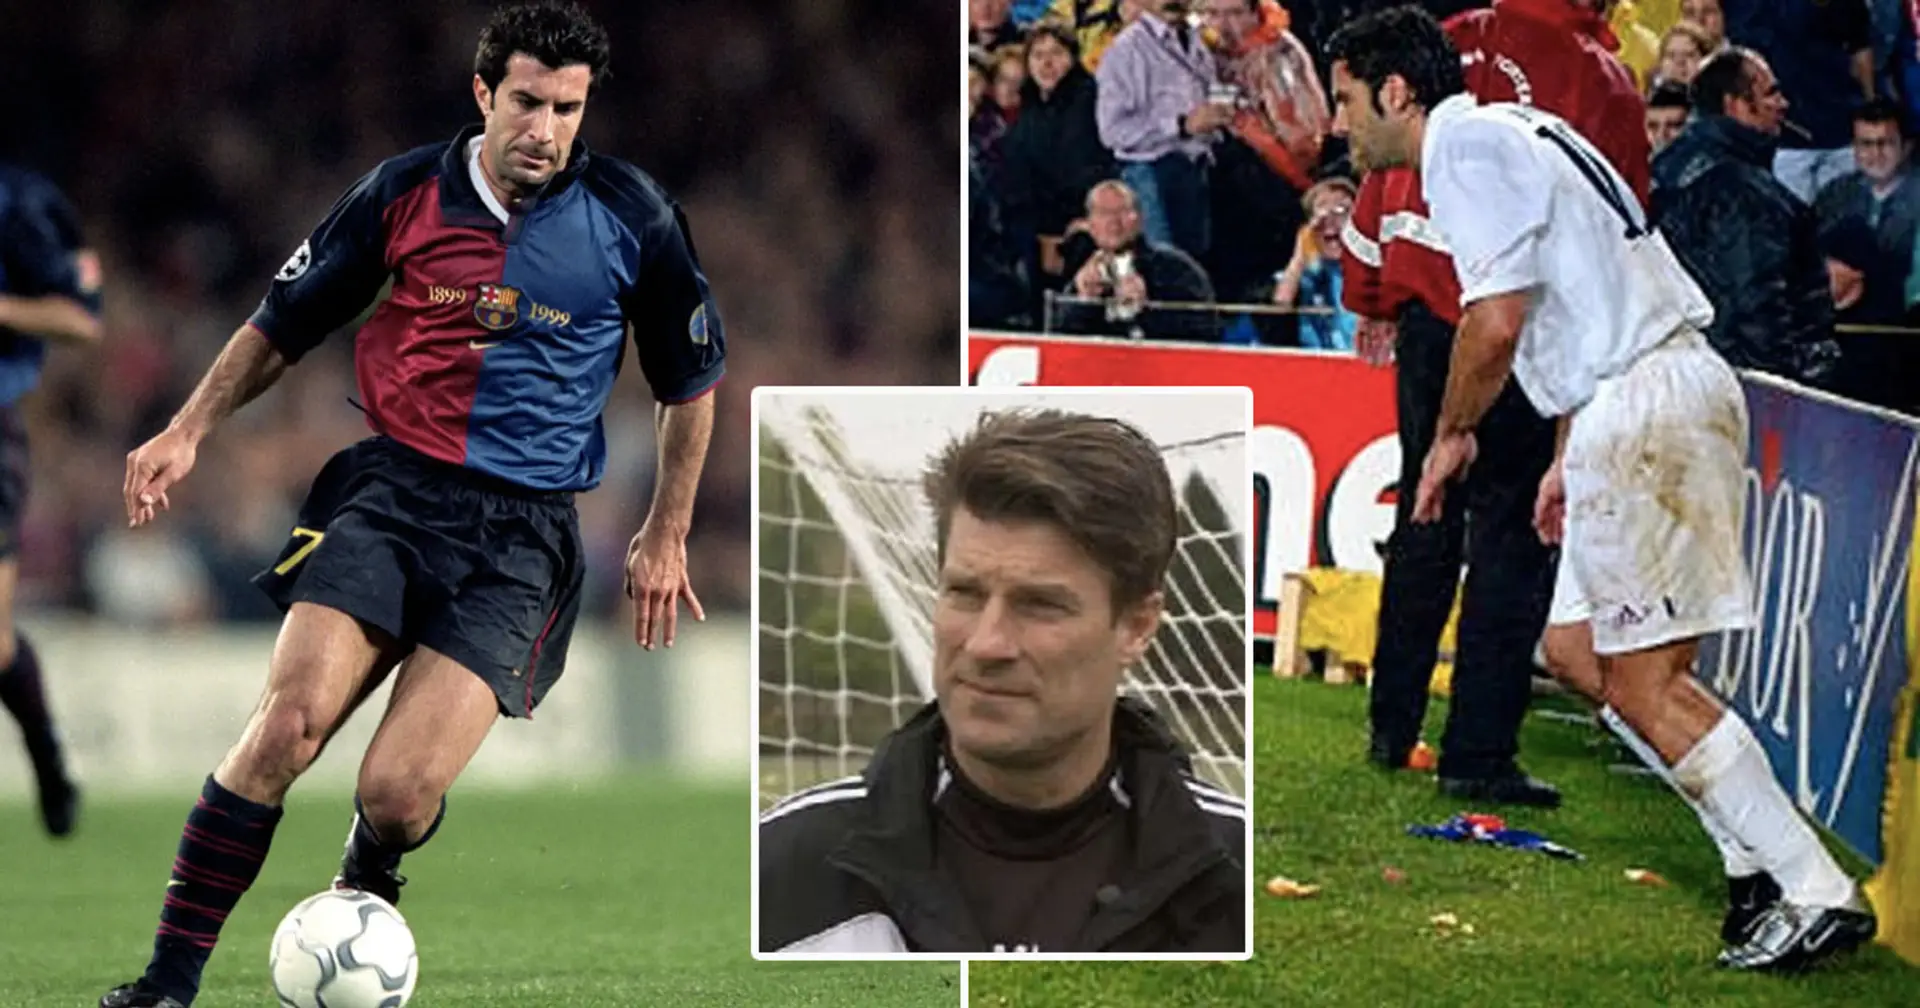 'Lie hurts more': Why Figo is a traitor for Barcelona fans but Laudrup and others aren't - Dane speaks out